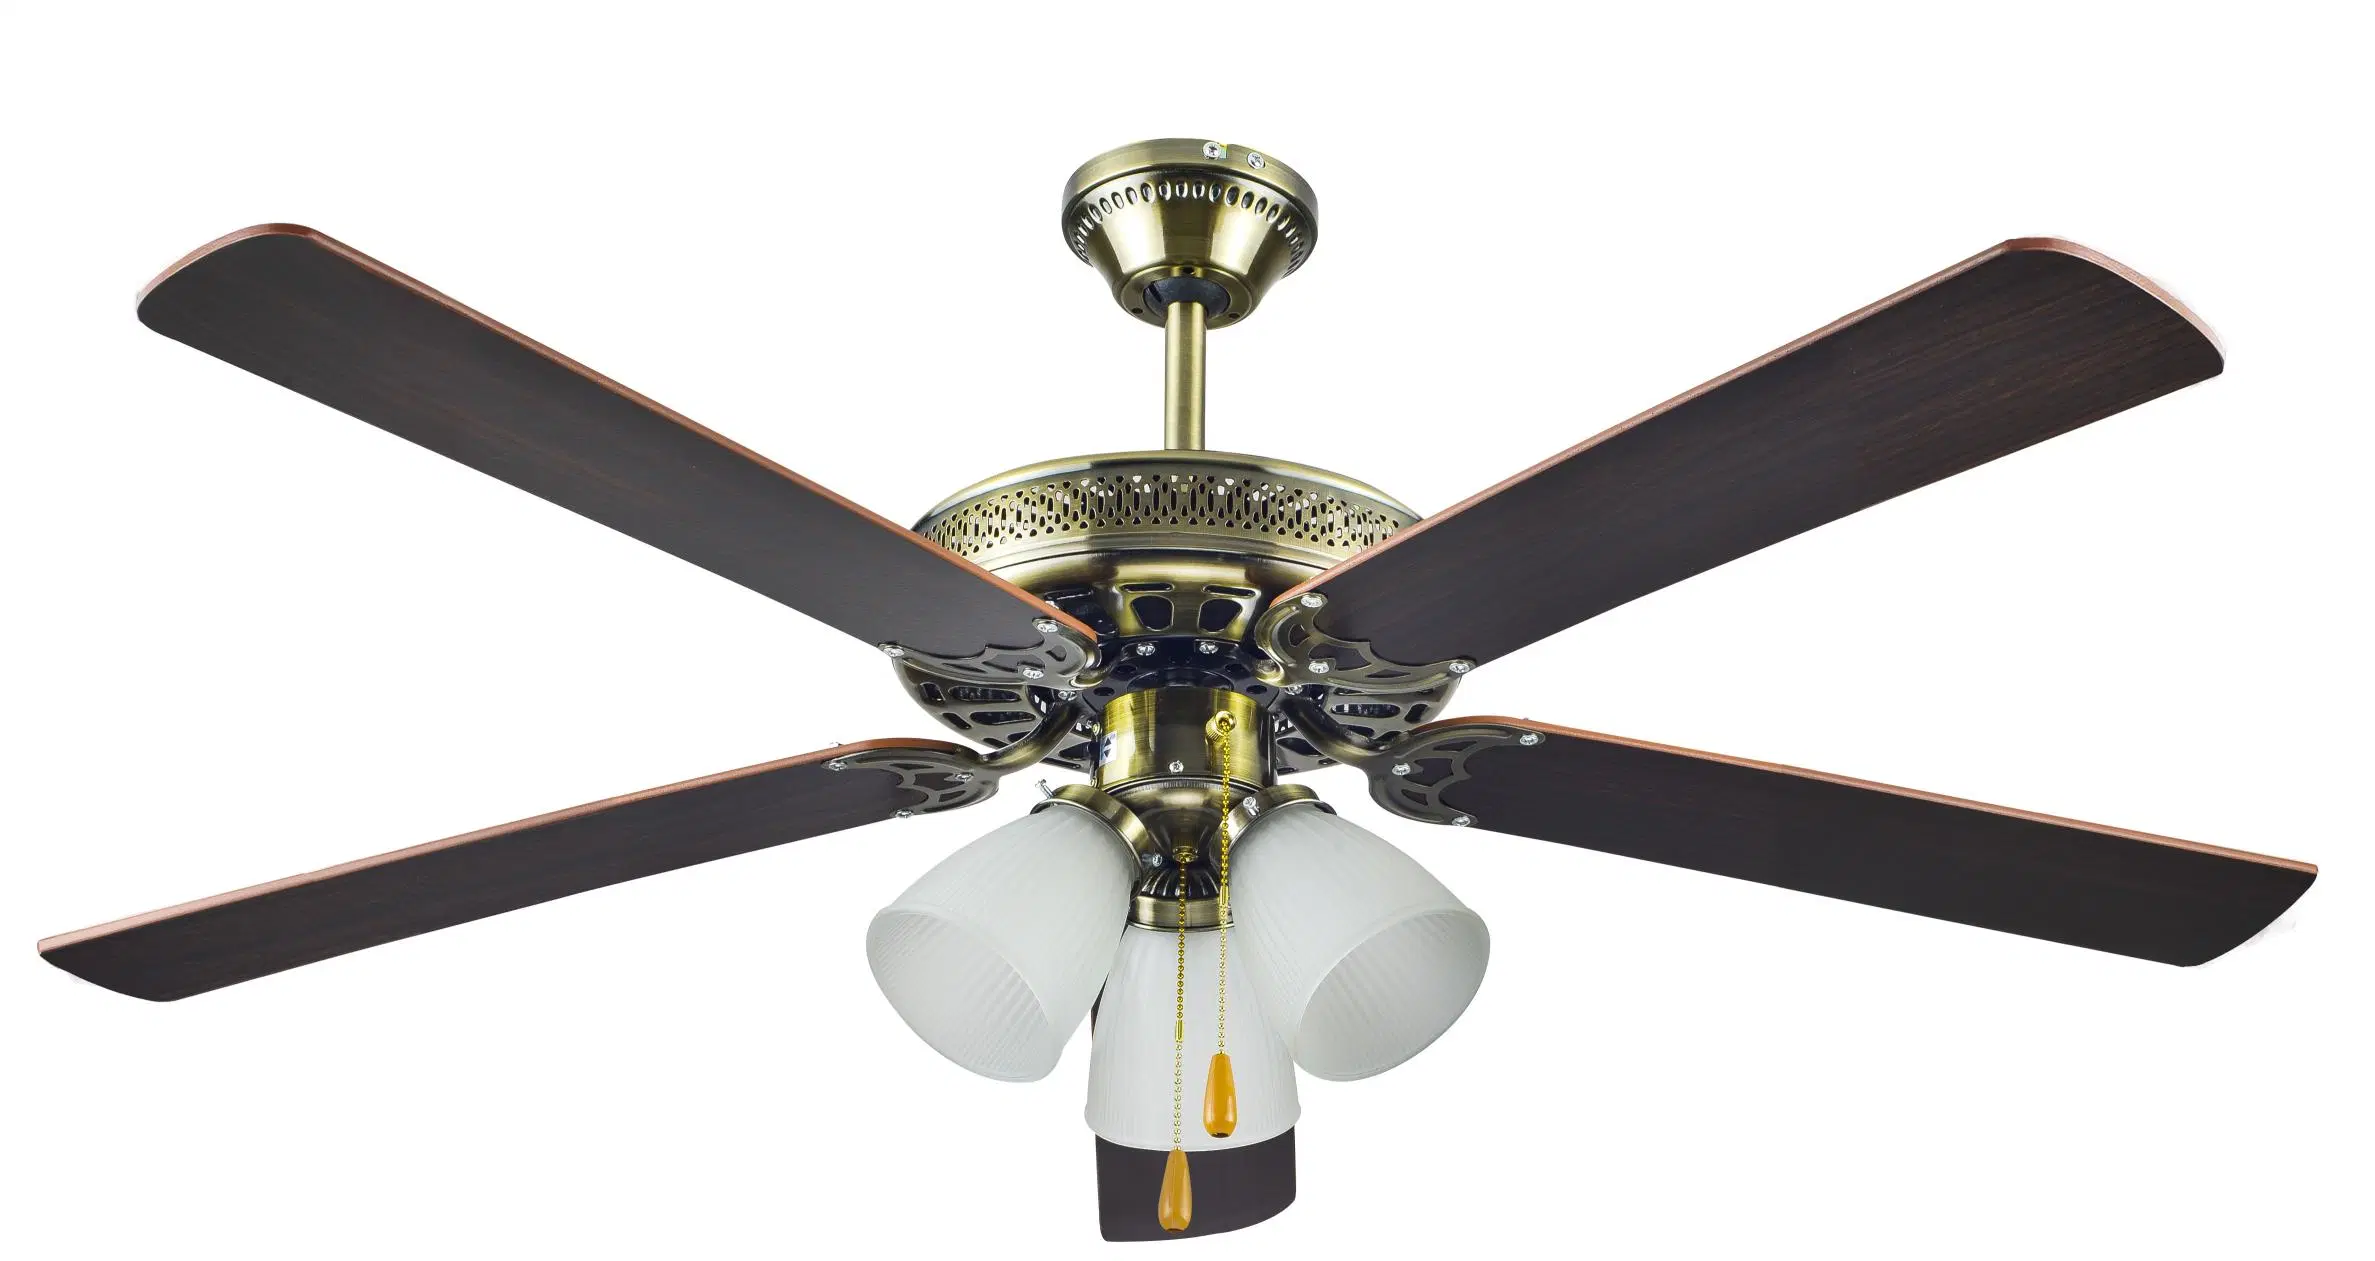 Modern Stylish Air Cooler Smart Decorative Lighting Fans 52 Inch 4 Iron Blades Ceiling Fan with Light Remote Control AC Ceiling Fan Chandelier